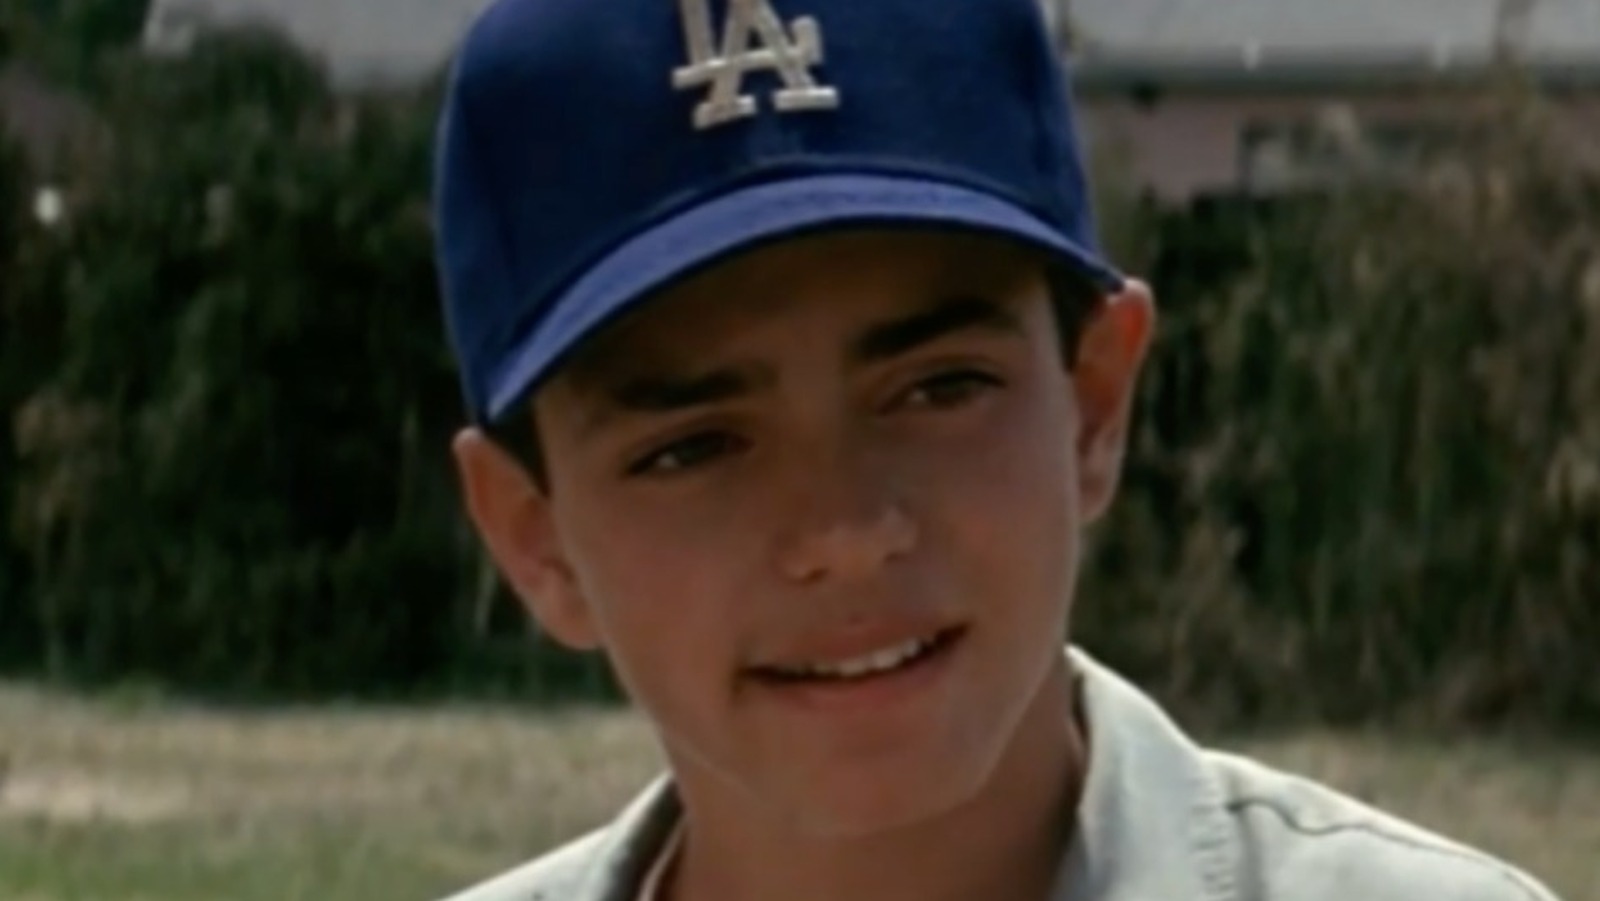 What Happened To Benny In The Sandlot?